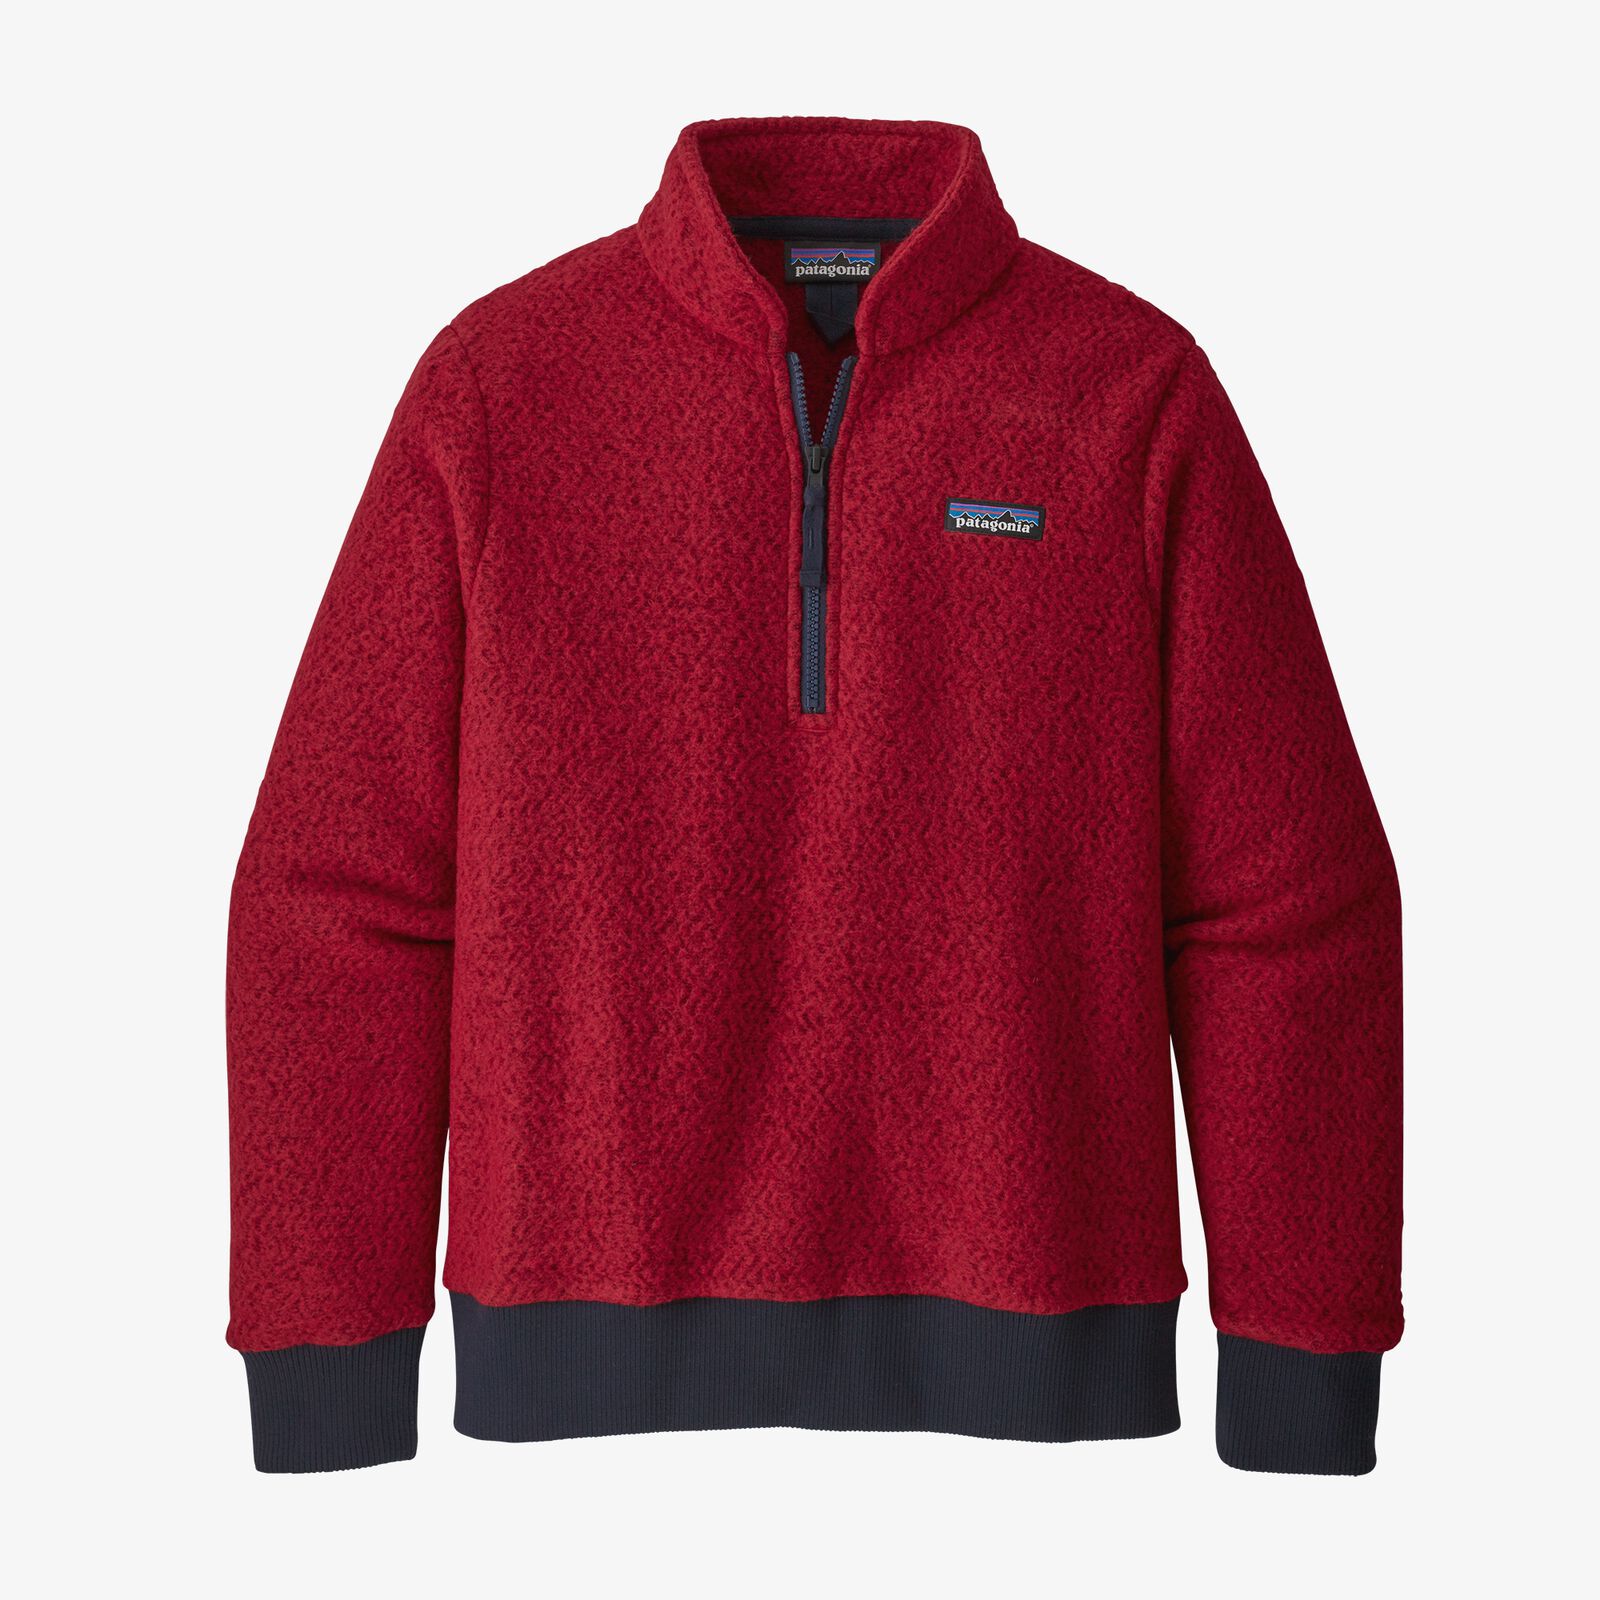 Patagonia Women's Woolyester Fleece Pullover